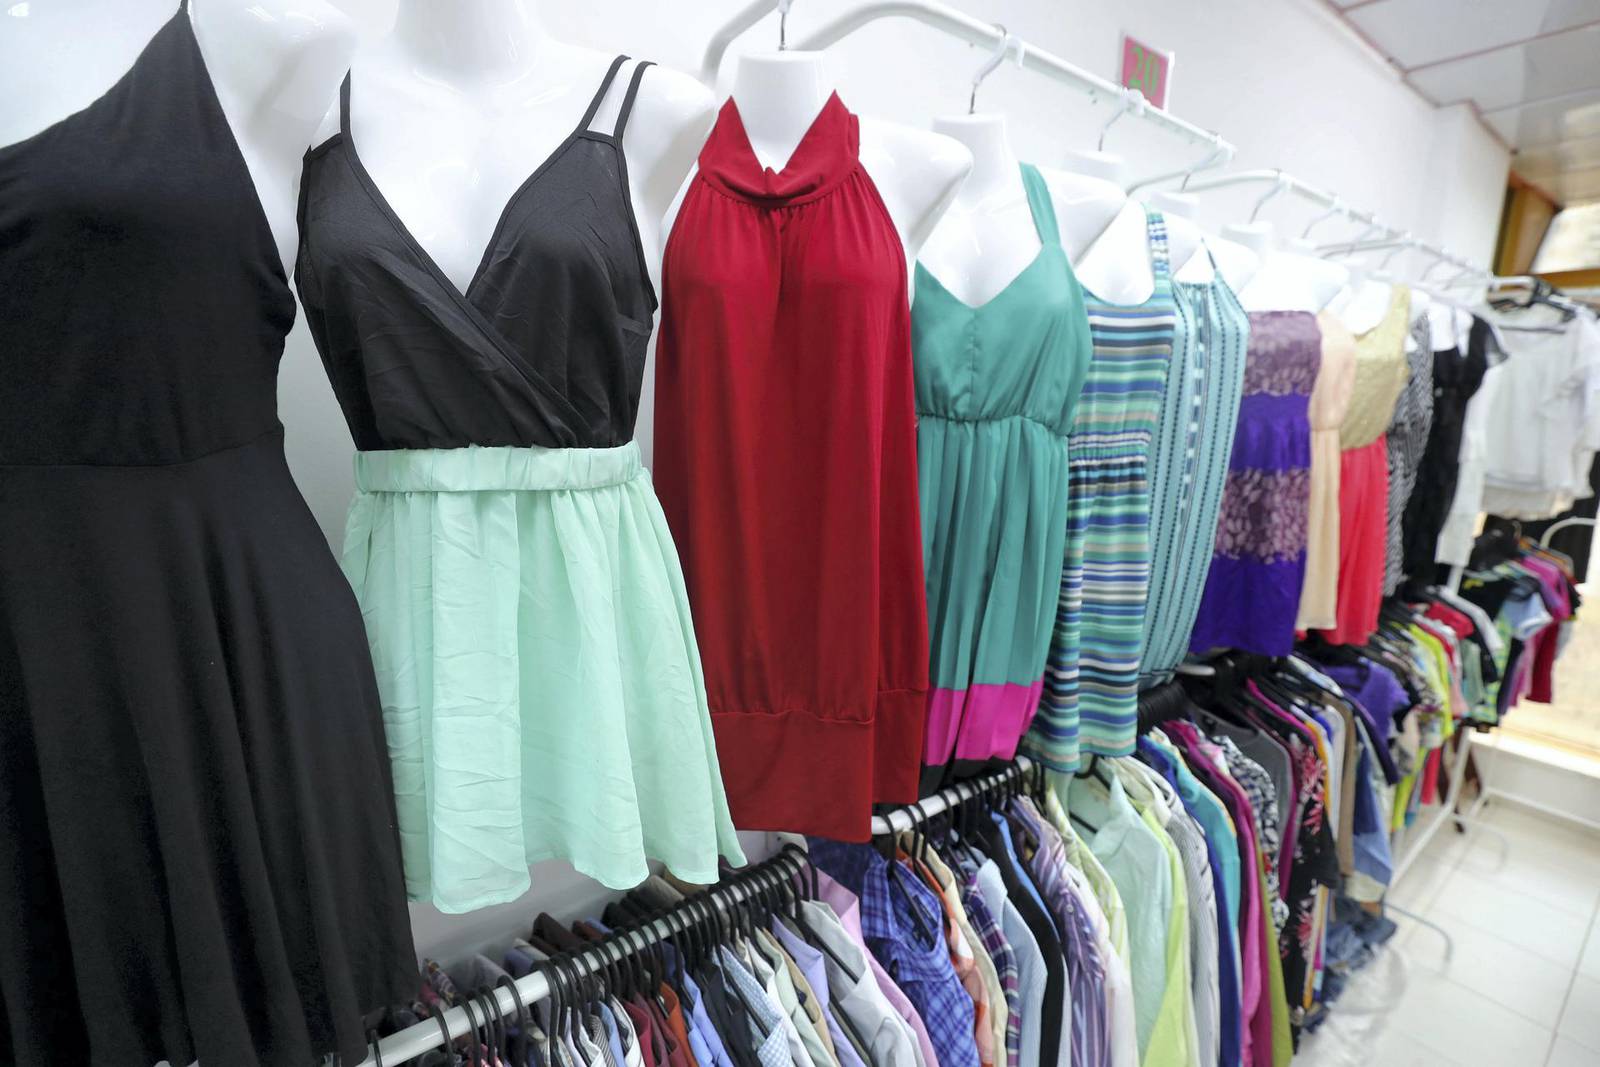 Ukay ukay thrift shops in Abu Dhabi: second-hand clothes for a steal